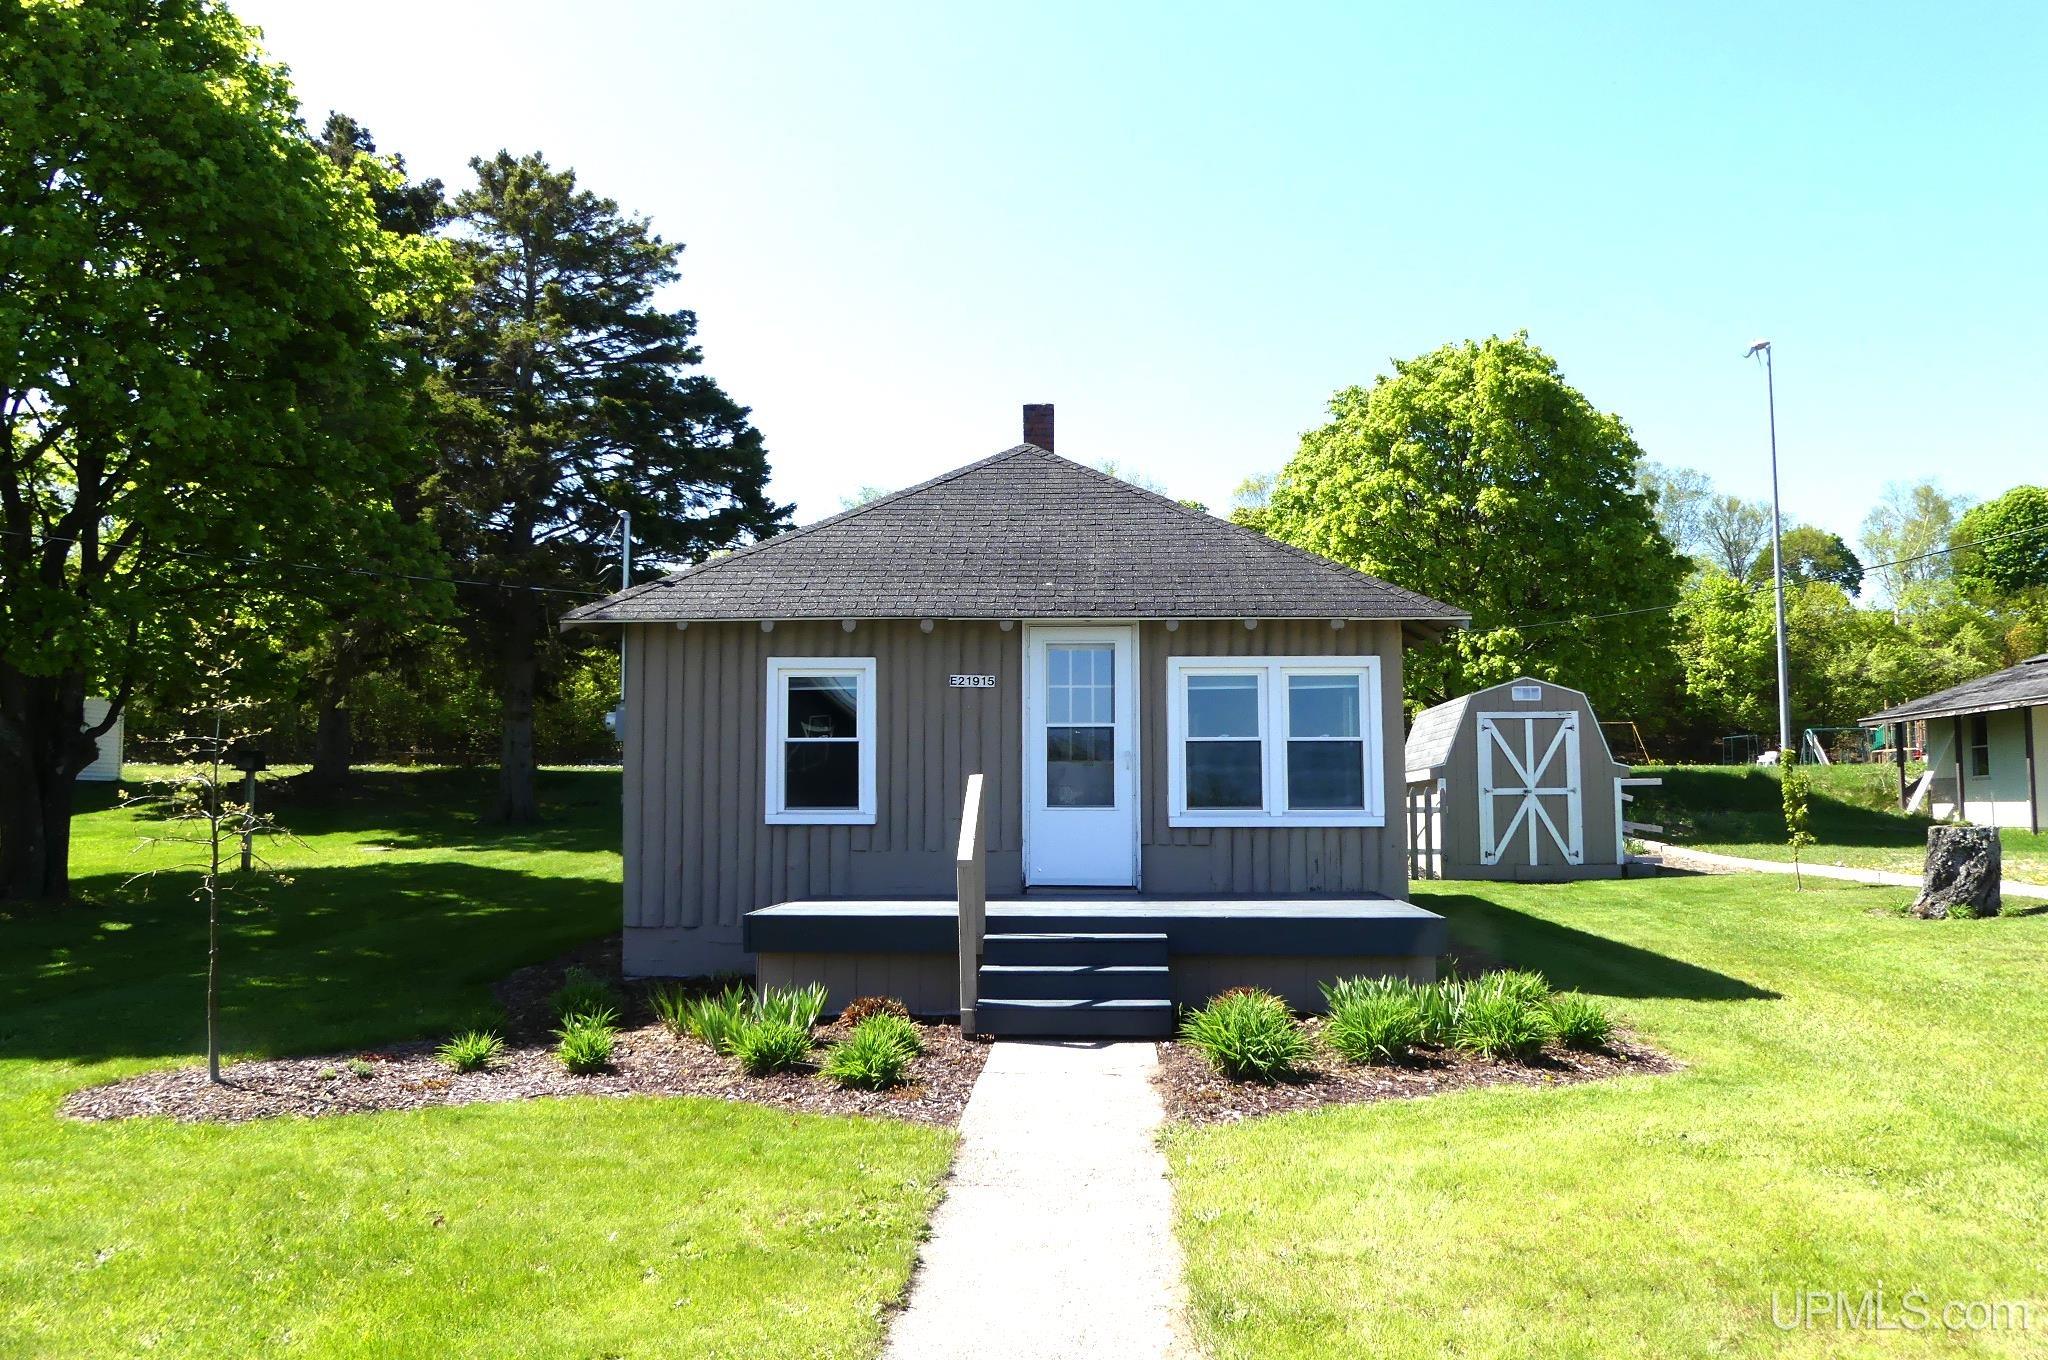 This quaint 1950's vertical log home is big on charm.  The lucky owners of this two bedroom, one bath home will enjoy peek-a-boo views of Grand Marais Bay and a coveted location right in the heart of town.  A large front deck overlooks the activity of town life and offers some great glimpses of Lake Superior.  The back fenced-in patio is perfect for pets or families with young children.  A barn style storage shed is on site for additional storage.  Recent updates include new windows, updated electrical panel with generator hook up, remodeled bathroom, septic system and gas oven/range.  Perennial beds and fruit trees complete the ideal picture of relaxation and home.  Take the next step toward your U.P. dream and schedule your showing, today!